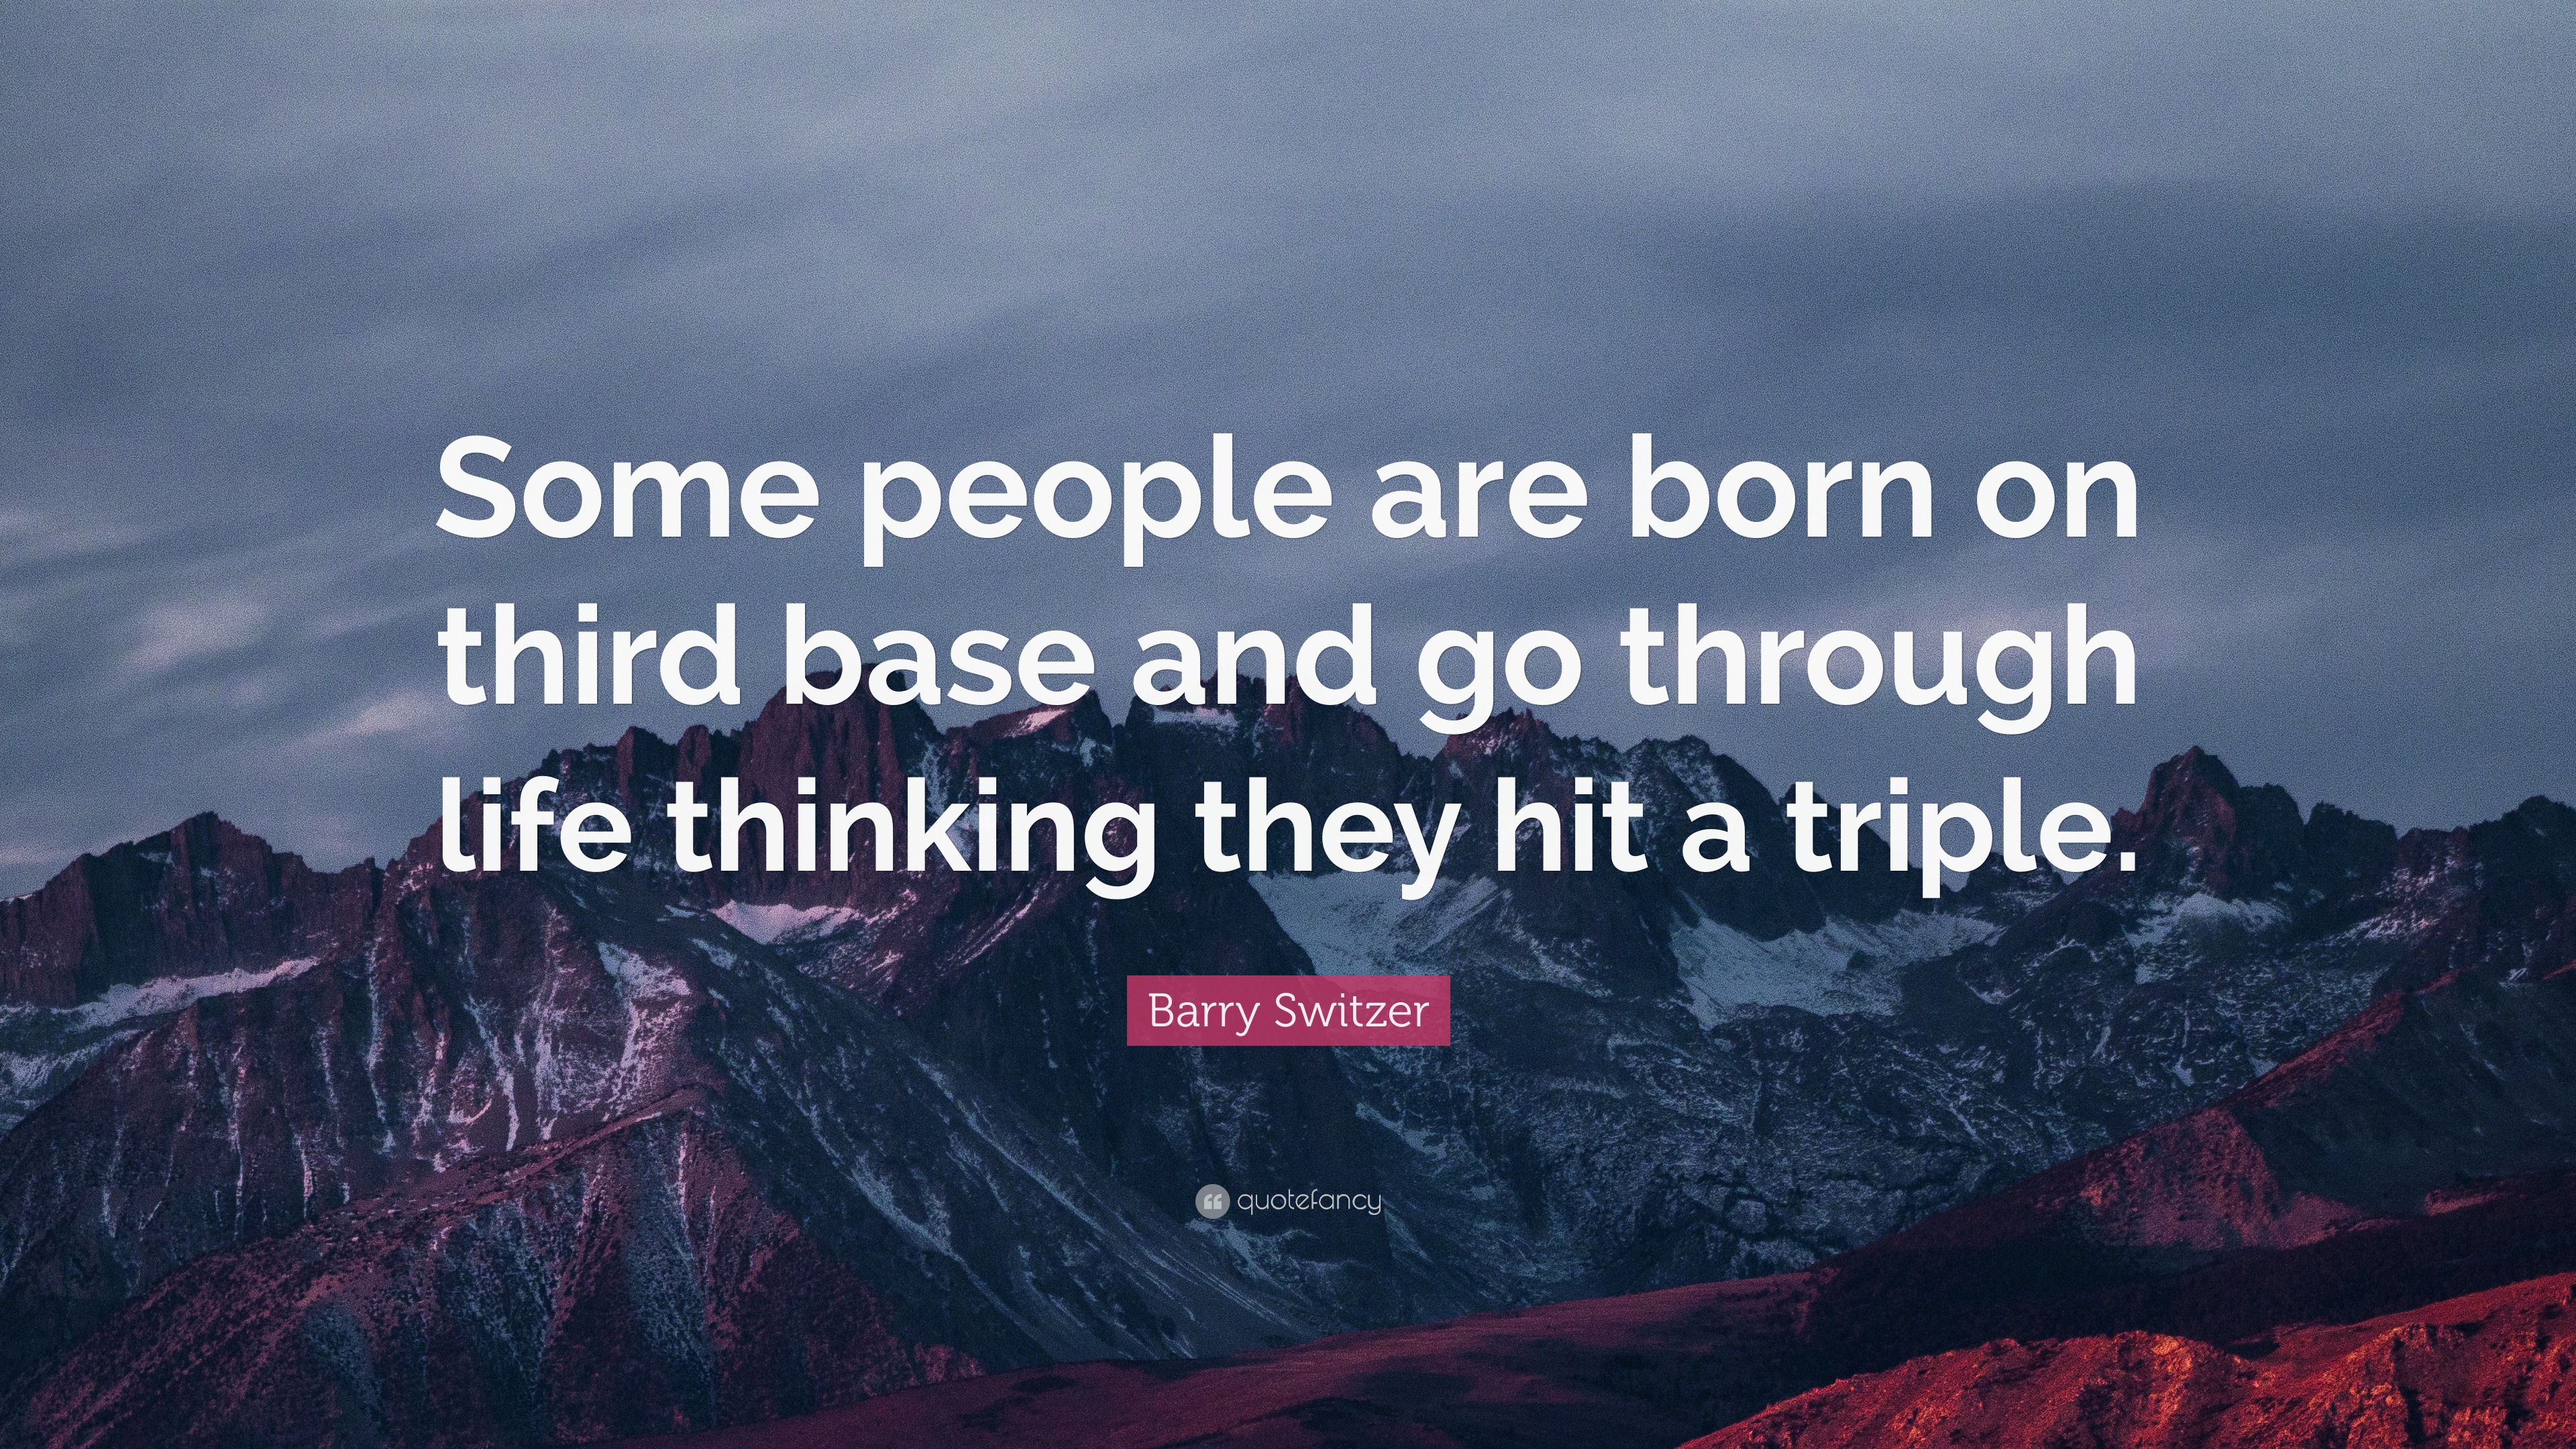 Barry Switzer Quote: “Some people are born on third base and go through  life thinking they